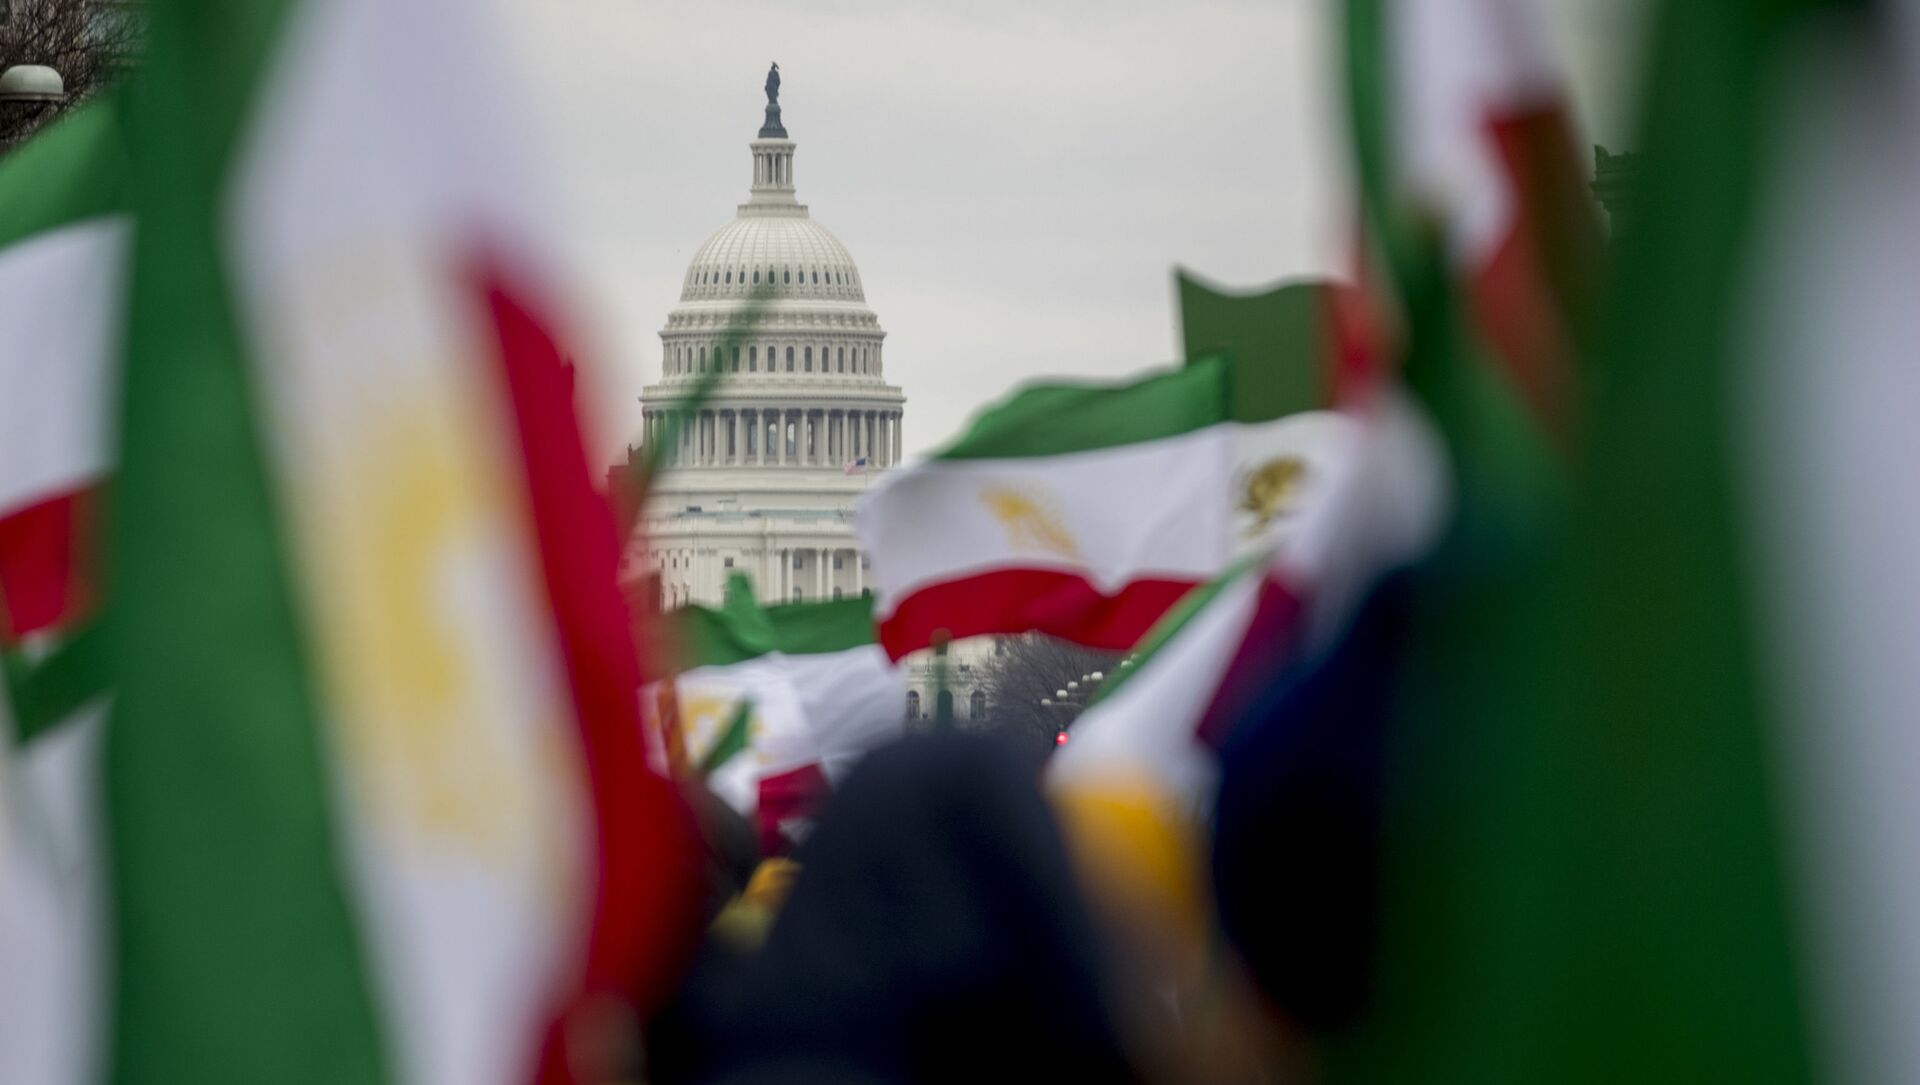 The Dome of the U.S. Capitol building is visible through Iranian flags during an Organization of Iranian-American Communities rally at Freedom Plaza in Washington, Friday, March 8, 2019.  - Sputnik International, 1920, 12.07.2021